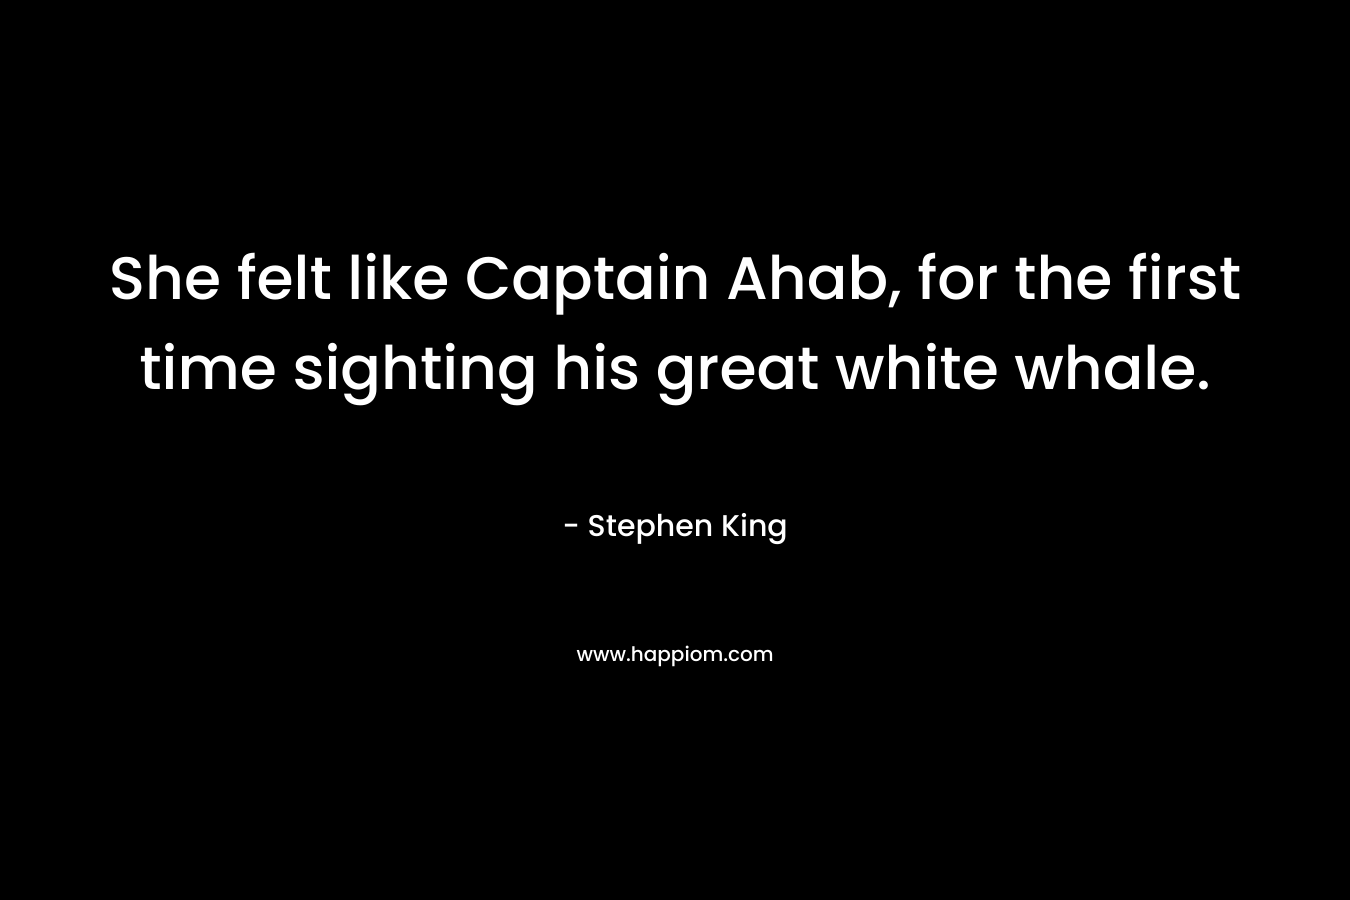 She felt like Captain Ahab, for the first time sighting his great white whale. – Stephen King